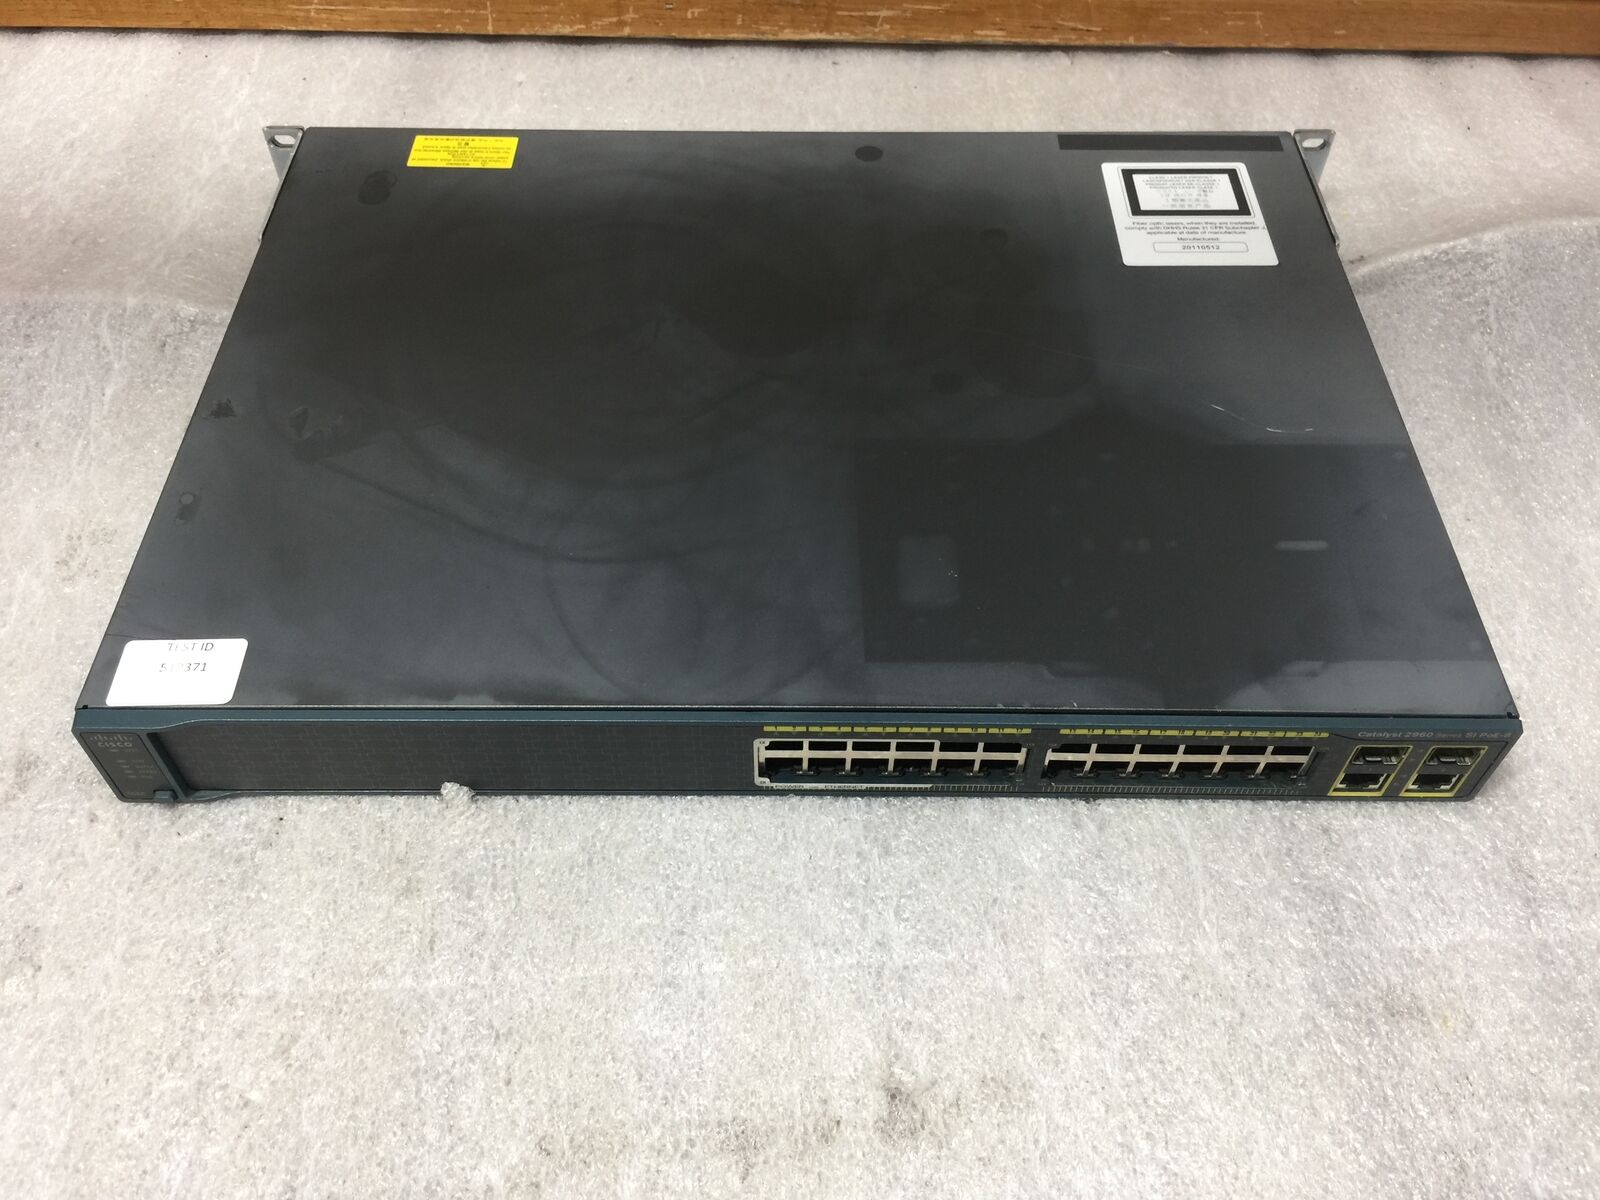 Cisco Catalyst 2960 WS-C2960-24LC-S V04 24 Port Switch, Tested and Working